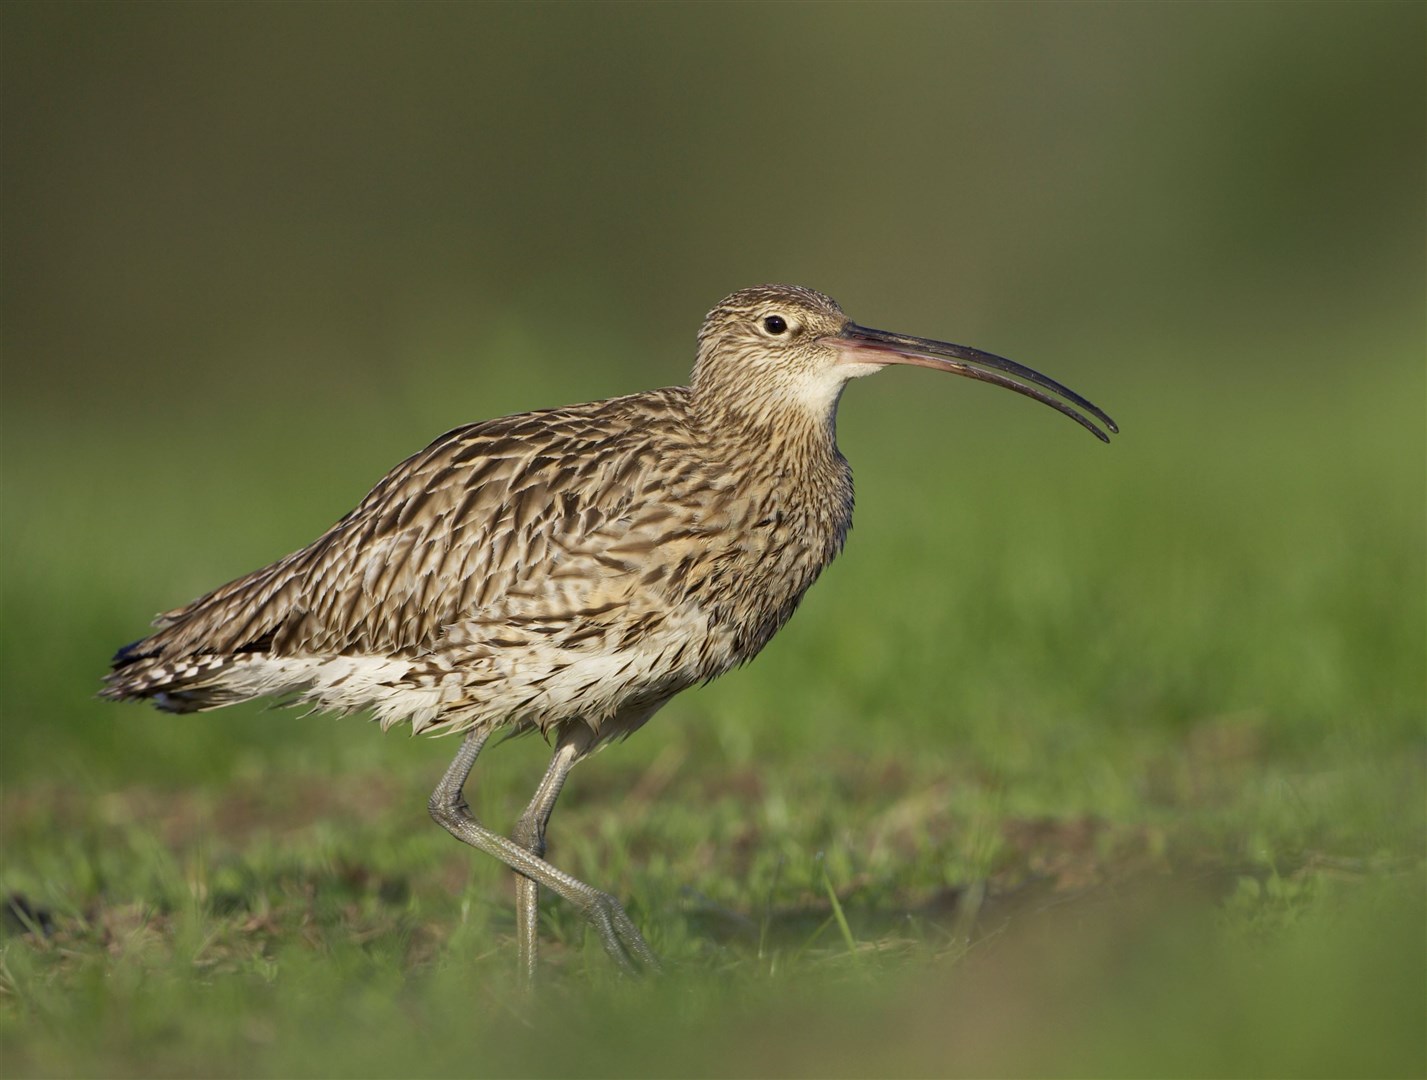 Curlew can easily be idenitifed by their distinctive beaks.